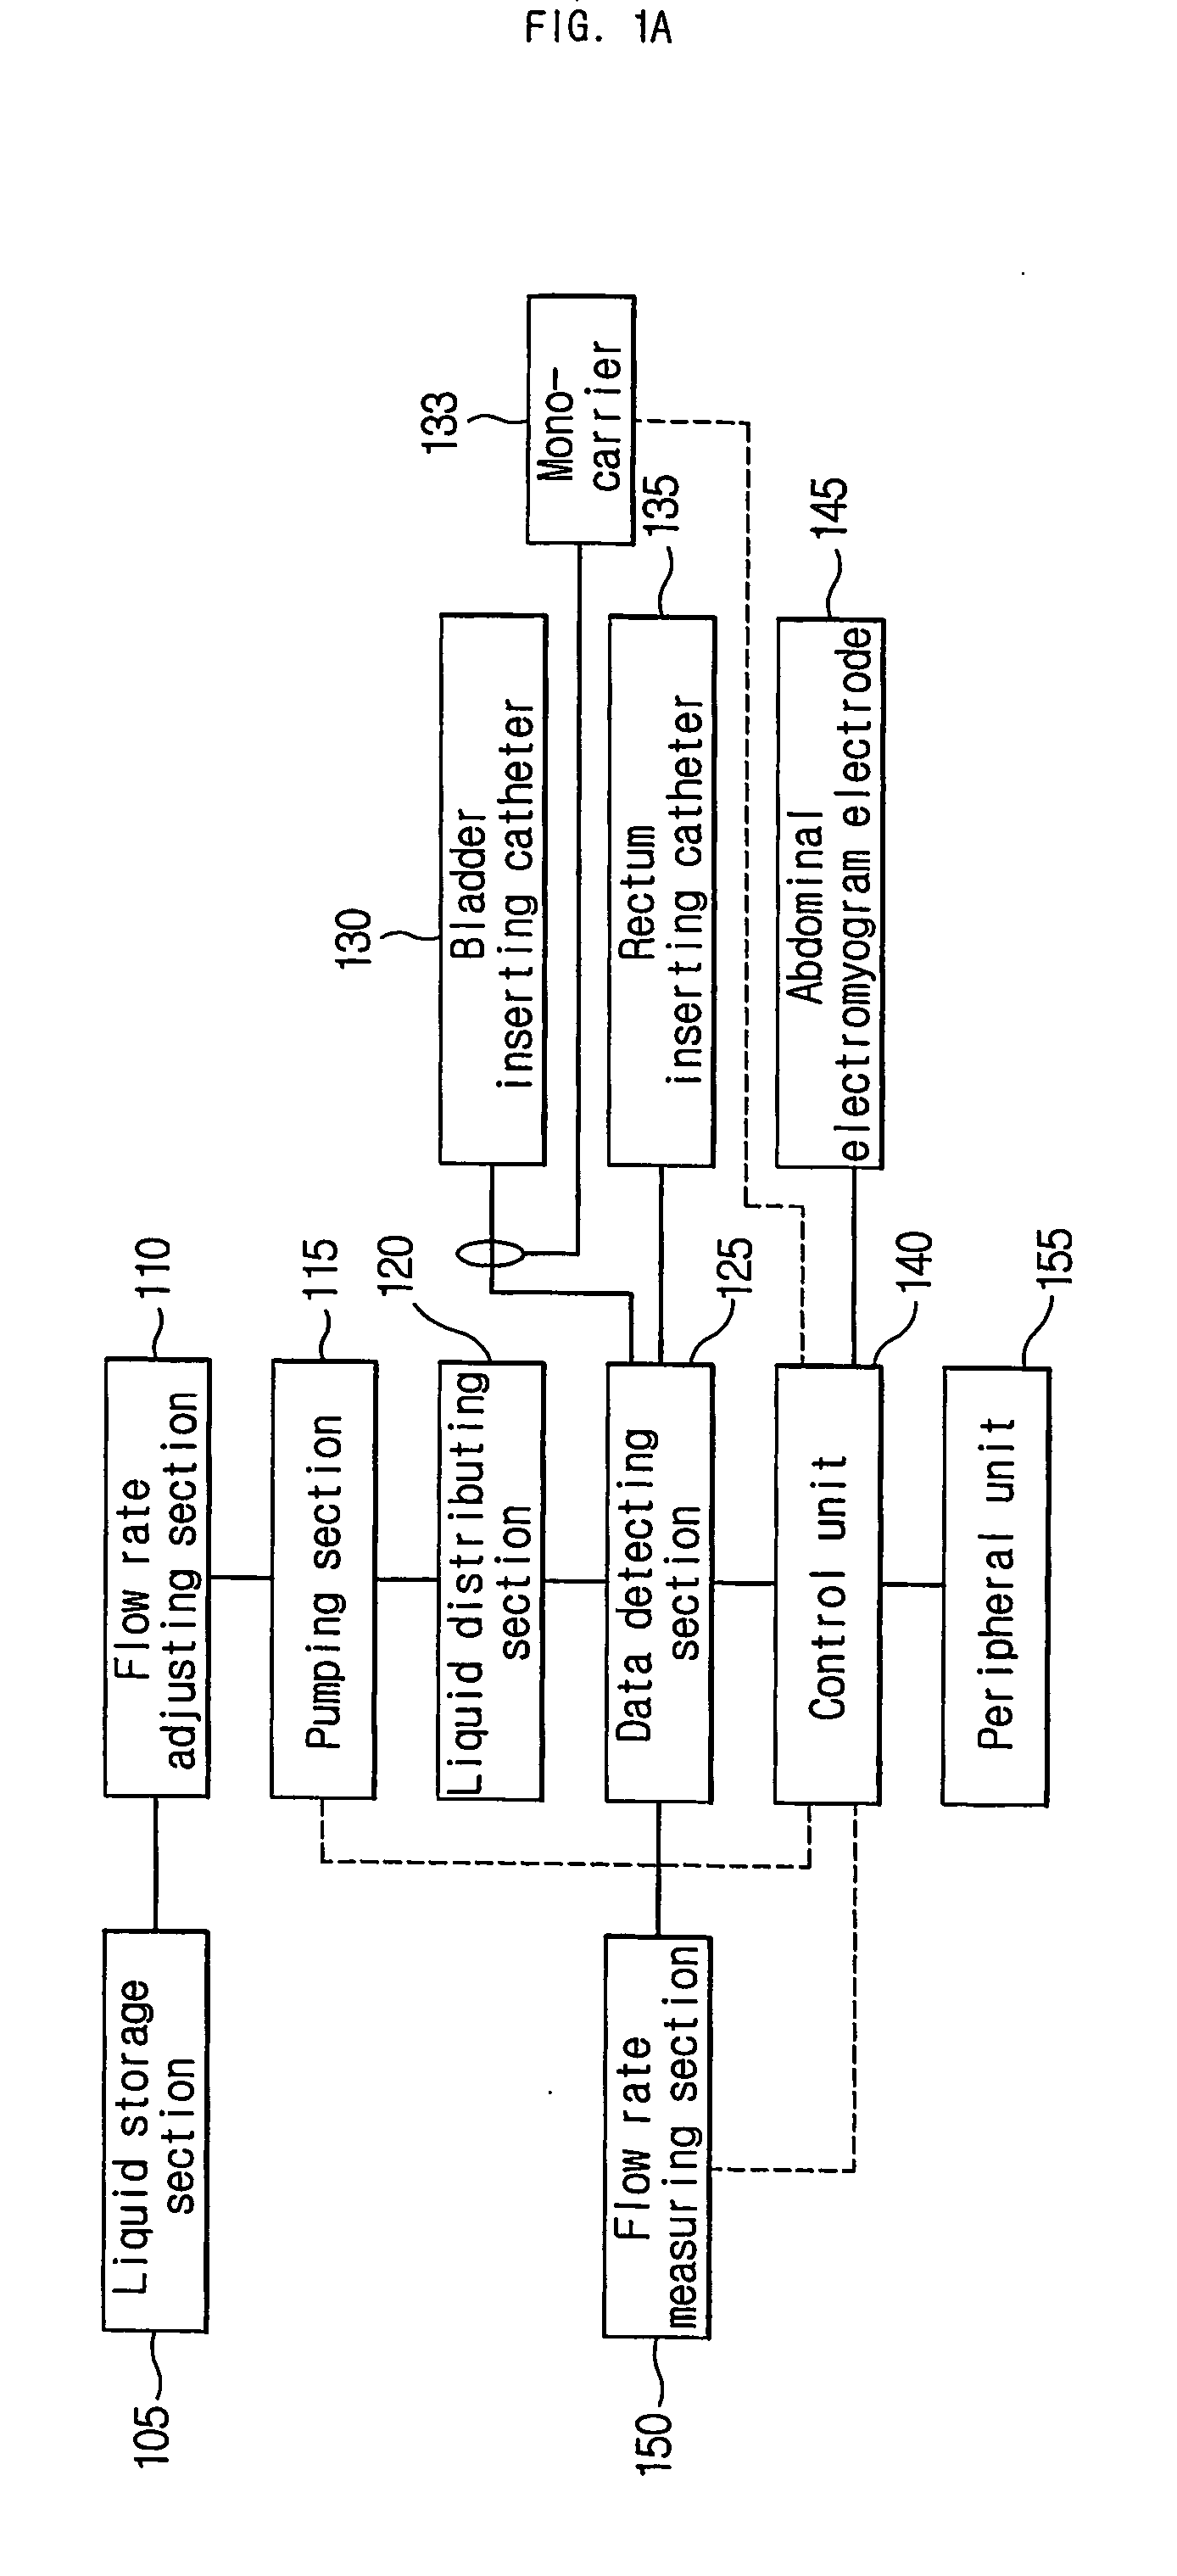 Method and apparatus for verifying data measured by several means in real-time